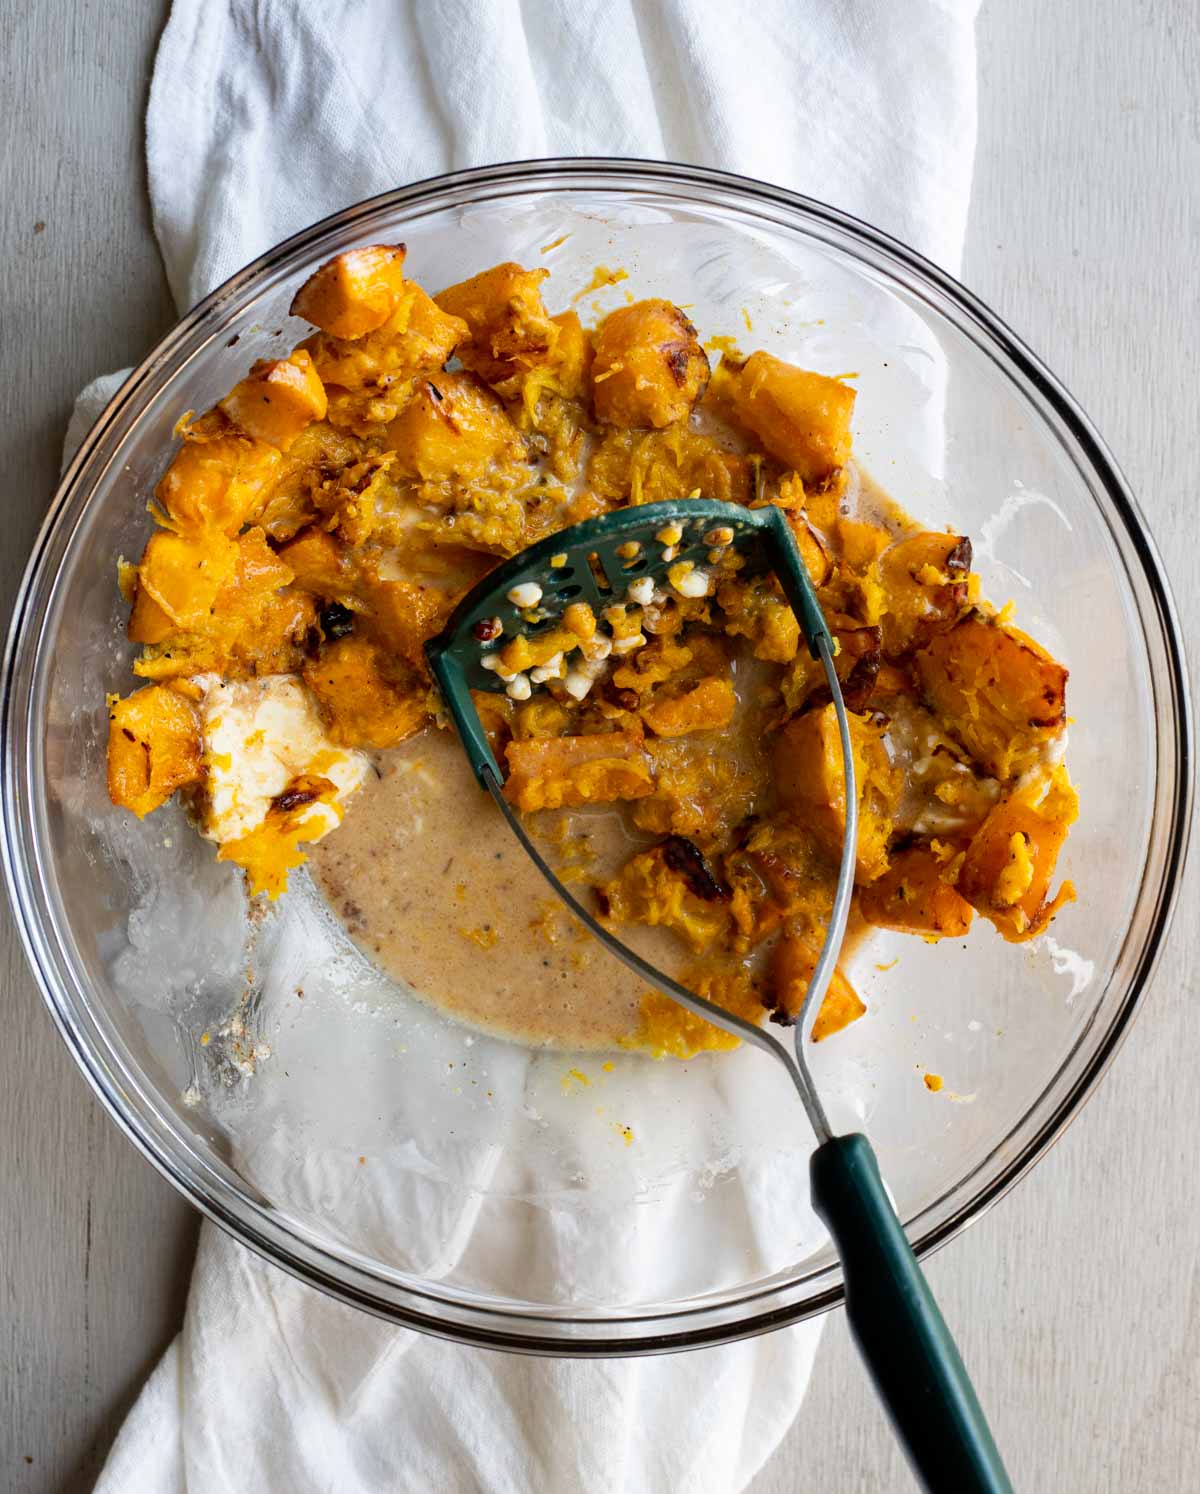 Roasted pumpkin cubes in a glass bowl and being mashed with a potato mashed.